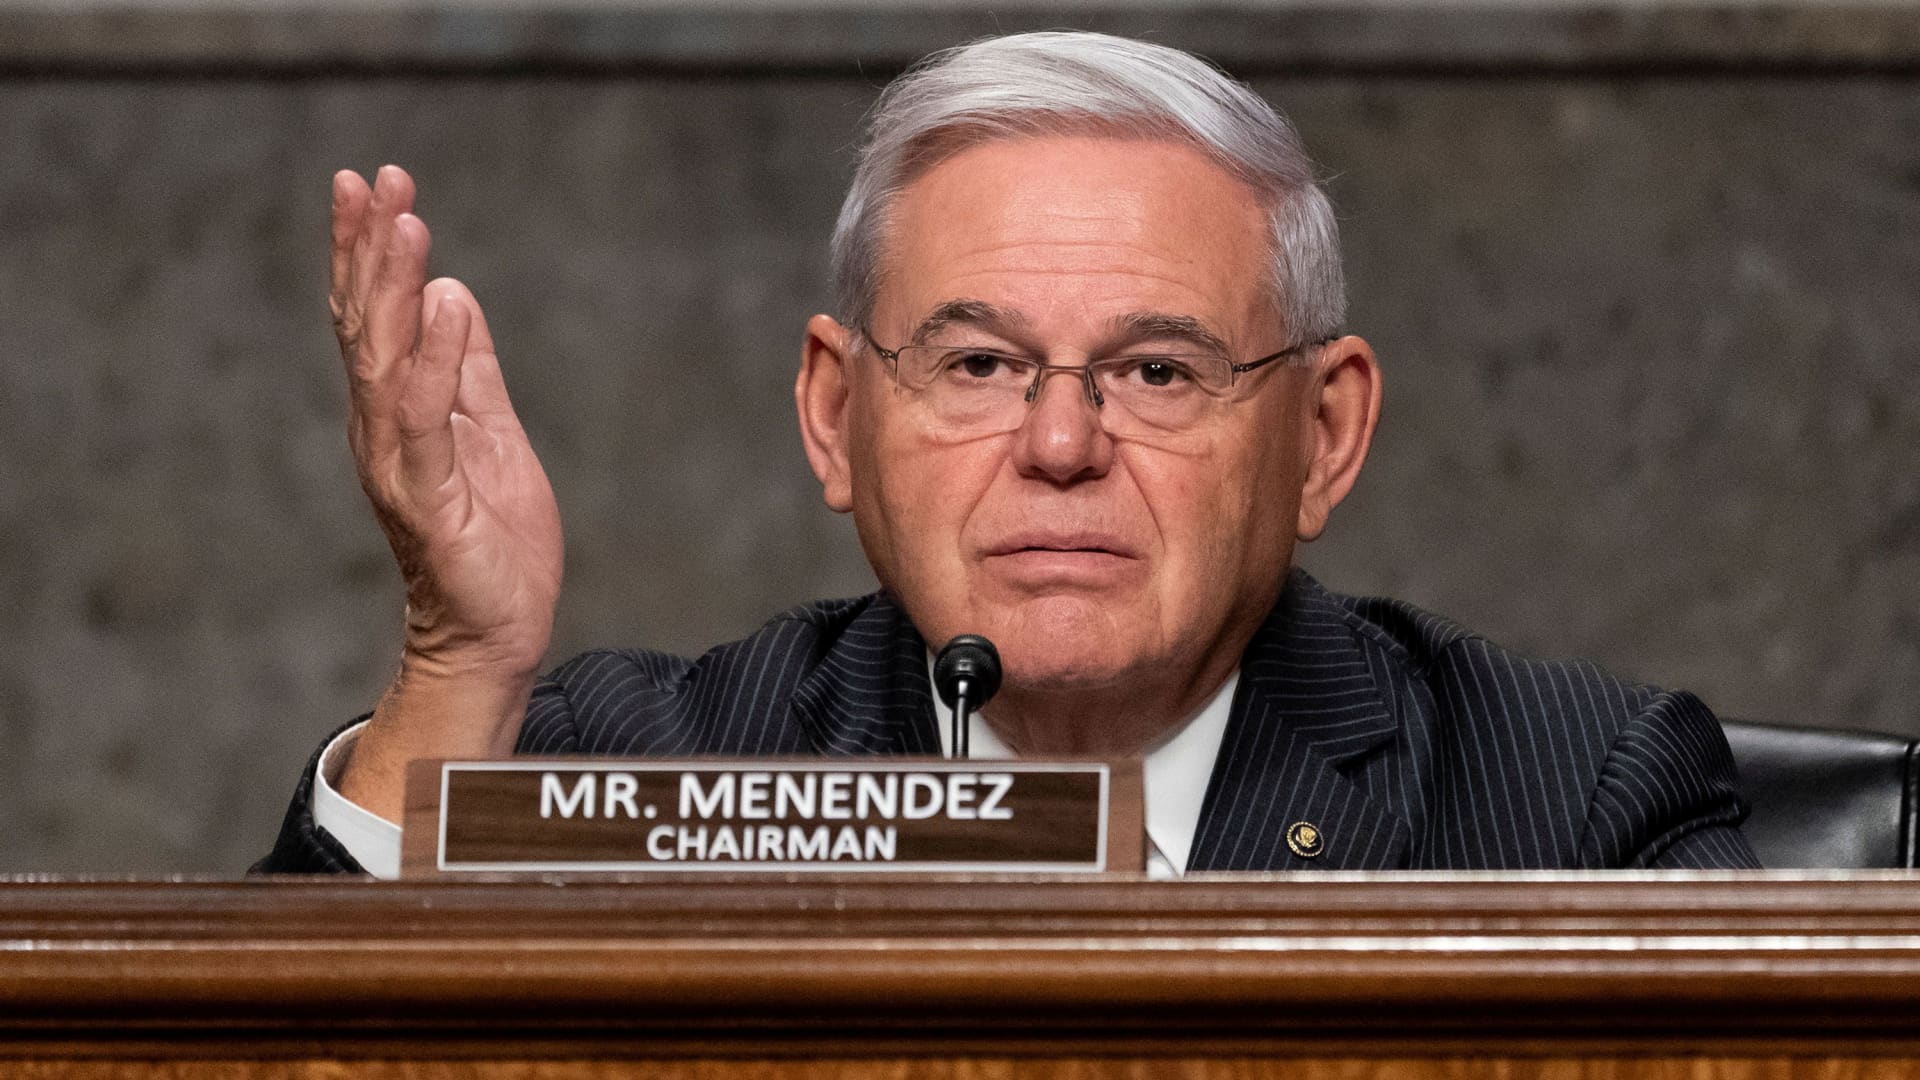 Chairman Bob Menendez (D-NJ) speaks during a hearing of the Senate Foreign Relations to examine U.S.-Russia policy, on Capitol Hill, Washington, December 7, 2021.